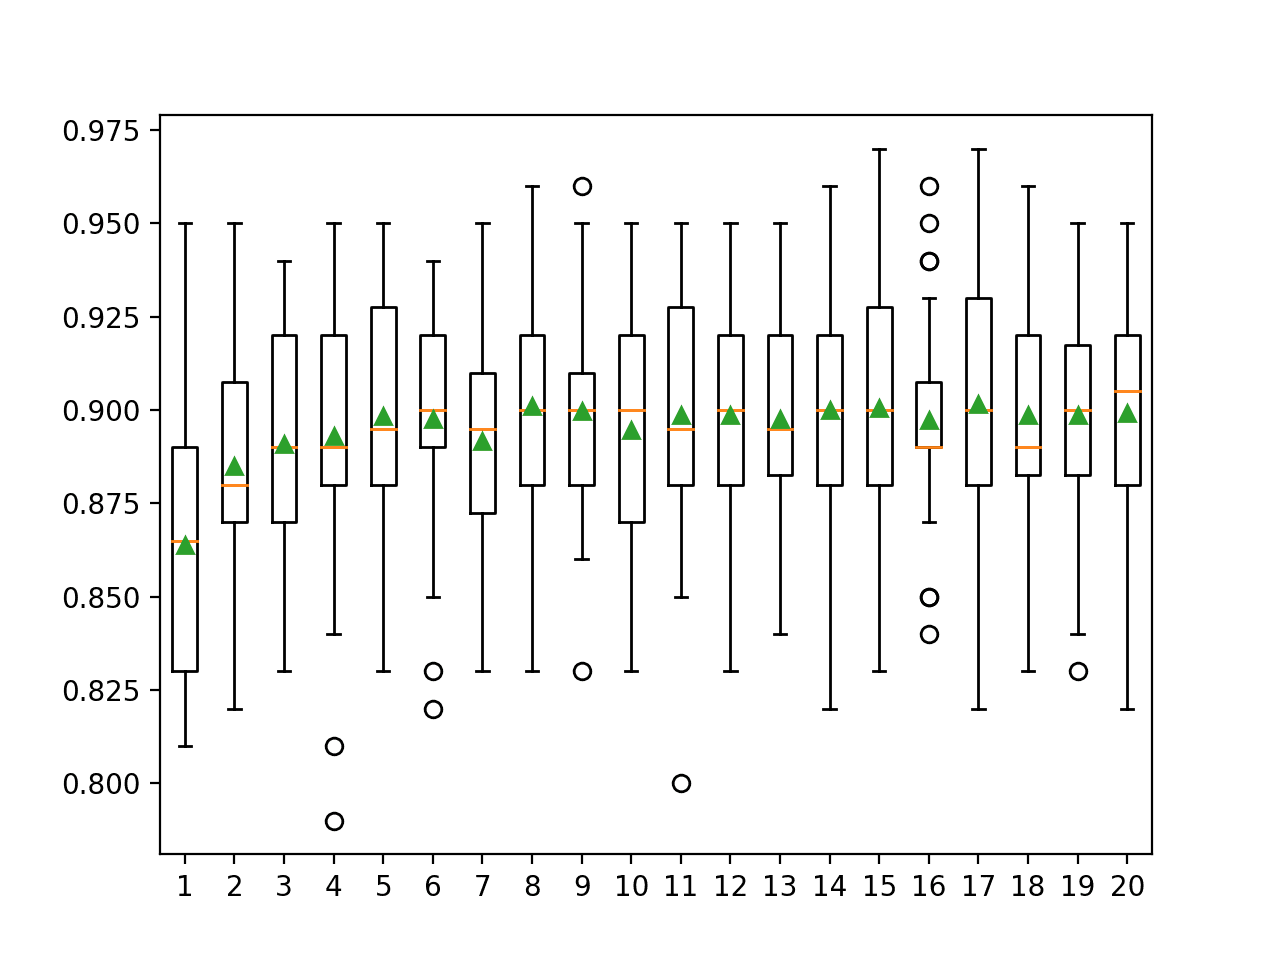 Box Plot of Gradient Boosting Ensemble Number of Features vs. Classification Accuracy